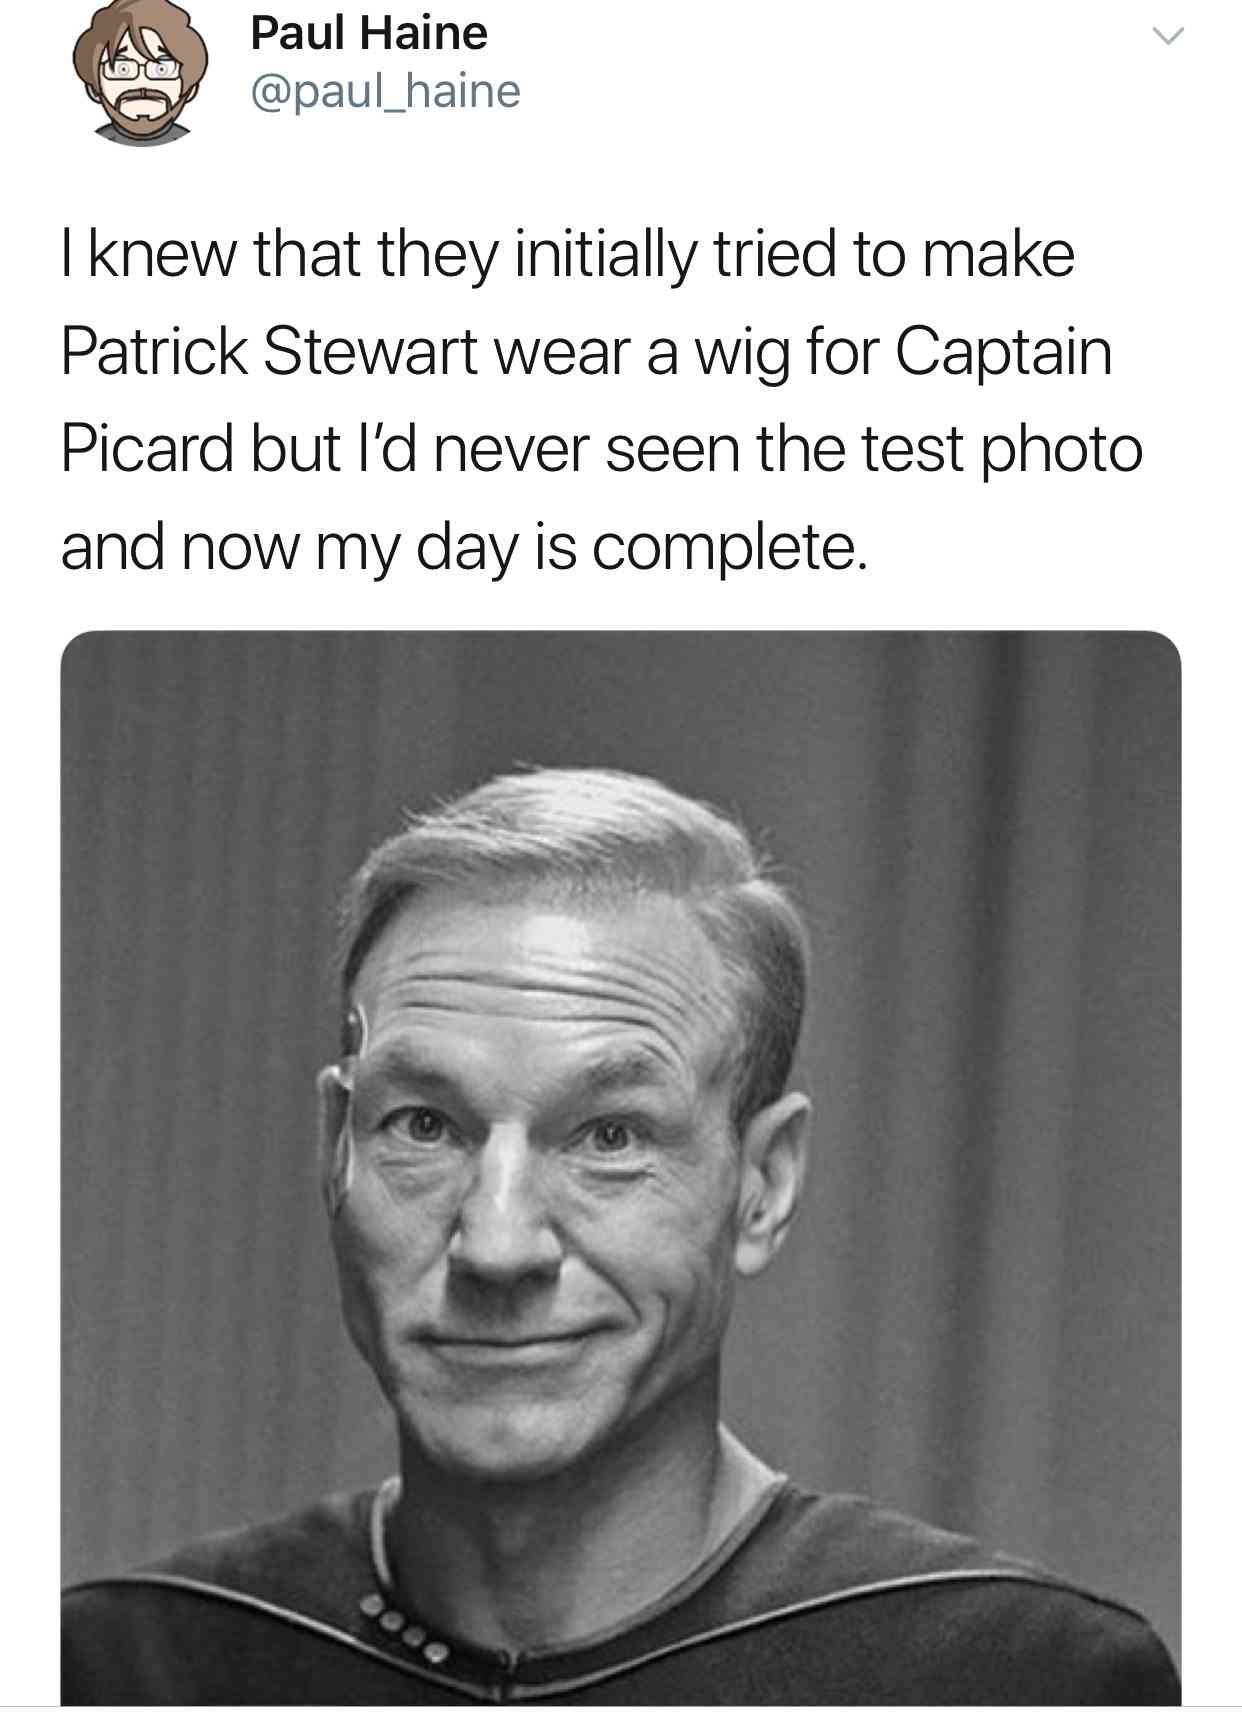 patrick stewart with hair - Paul Haine I knew that they initially tried to make Patrick Stewart wear a wig for Captain Picard but I'd never seen the test photo and now my day is complete.